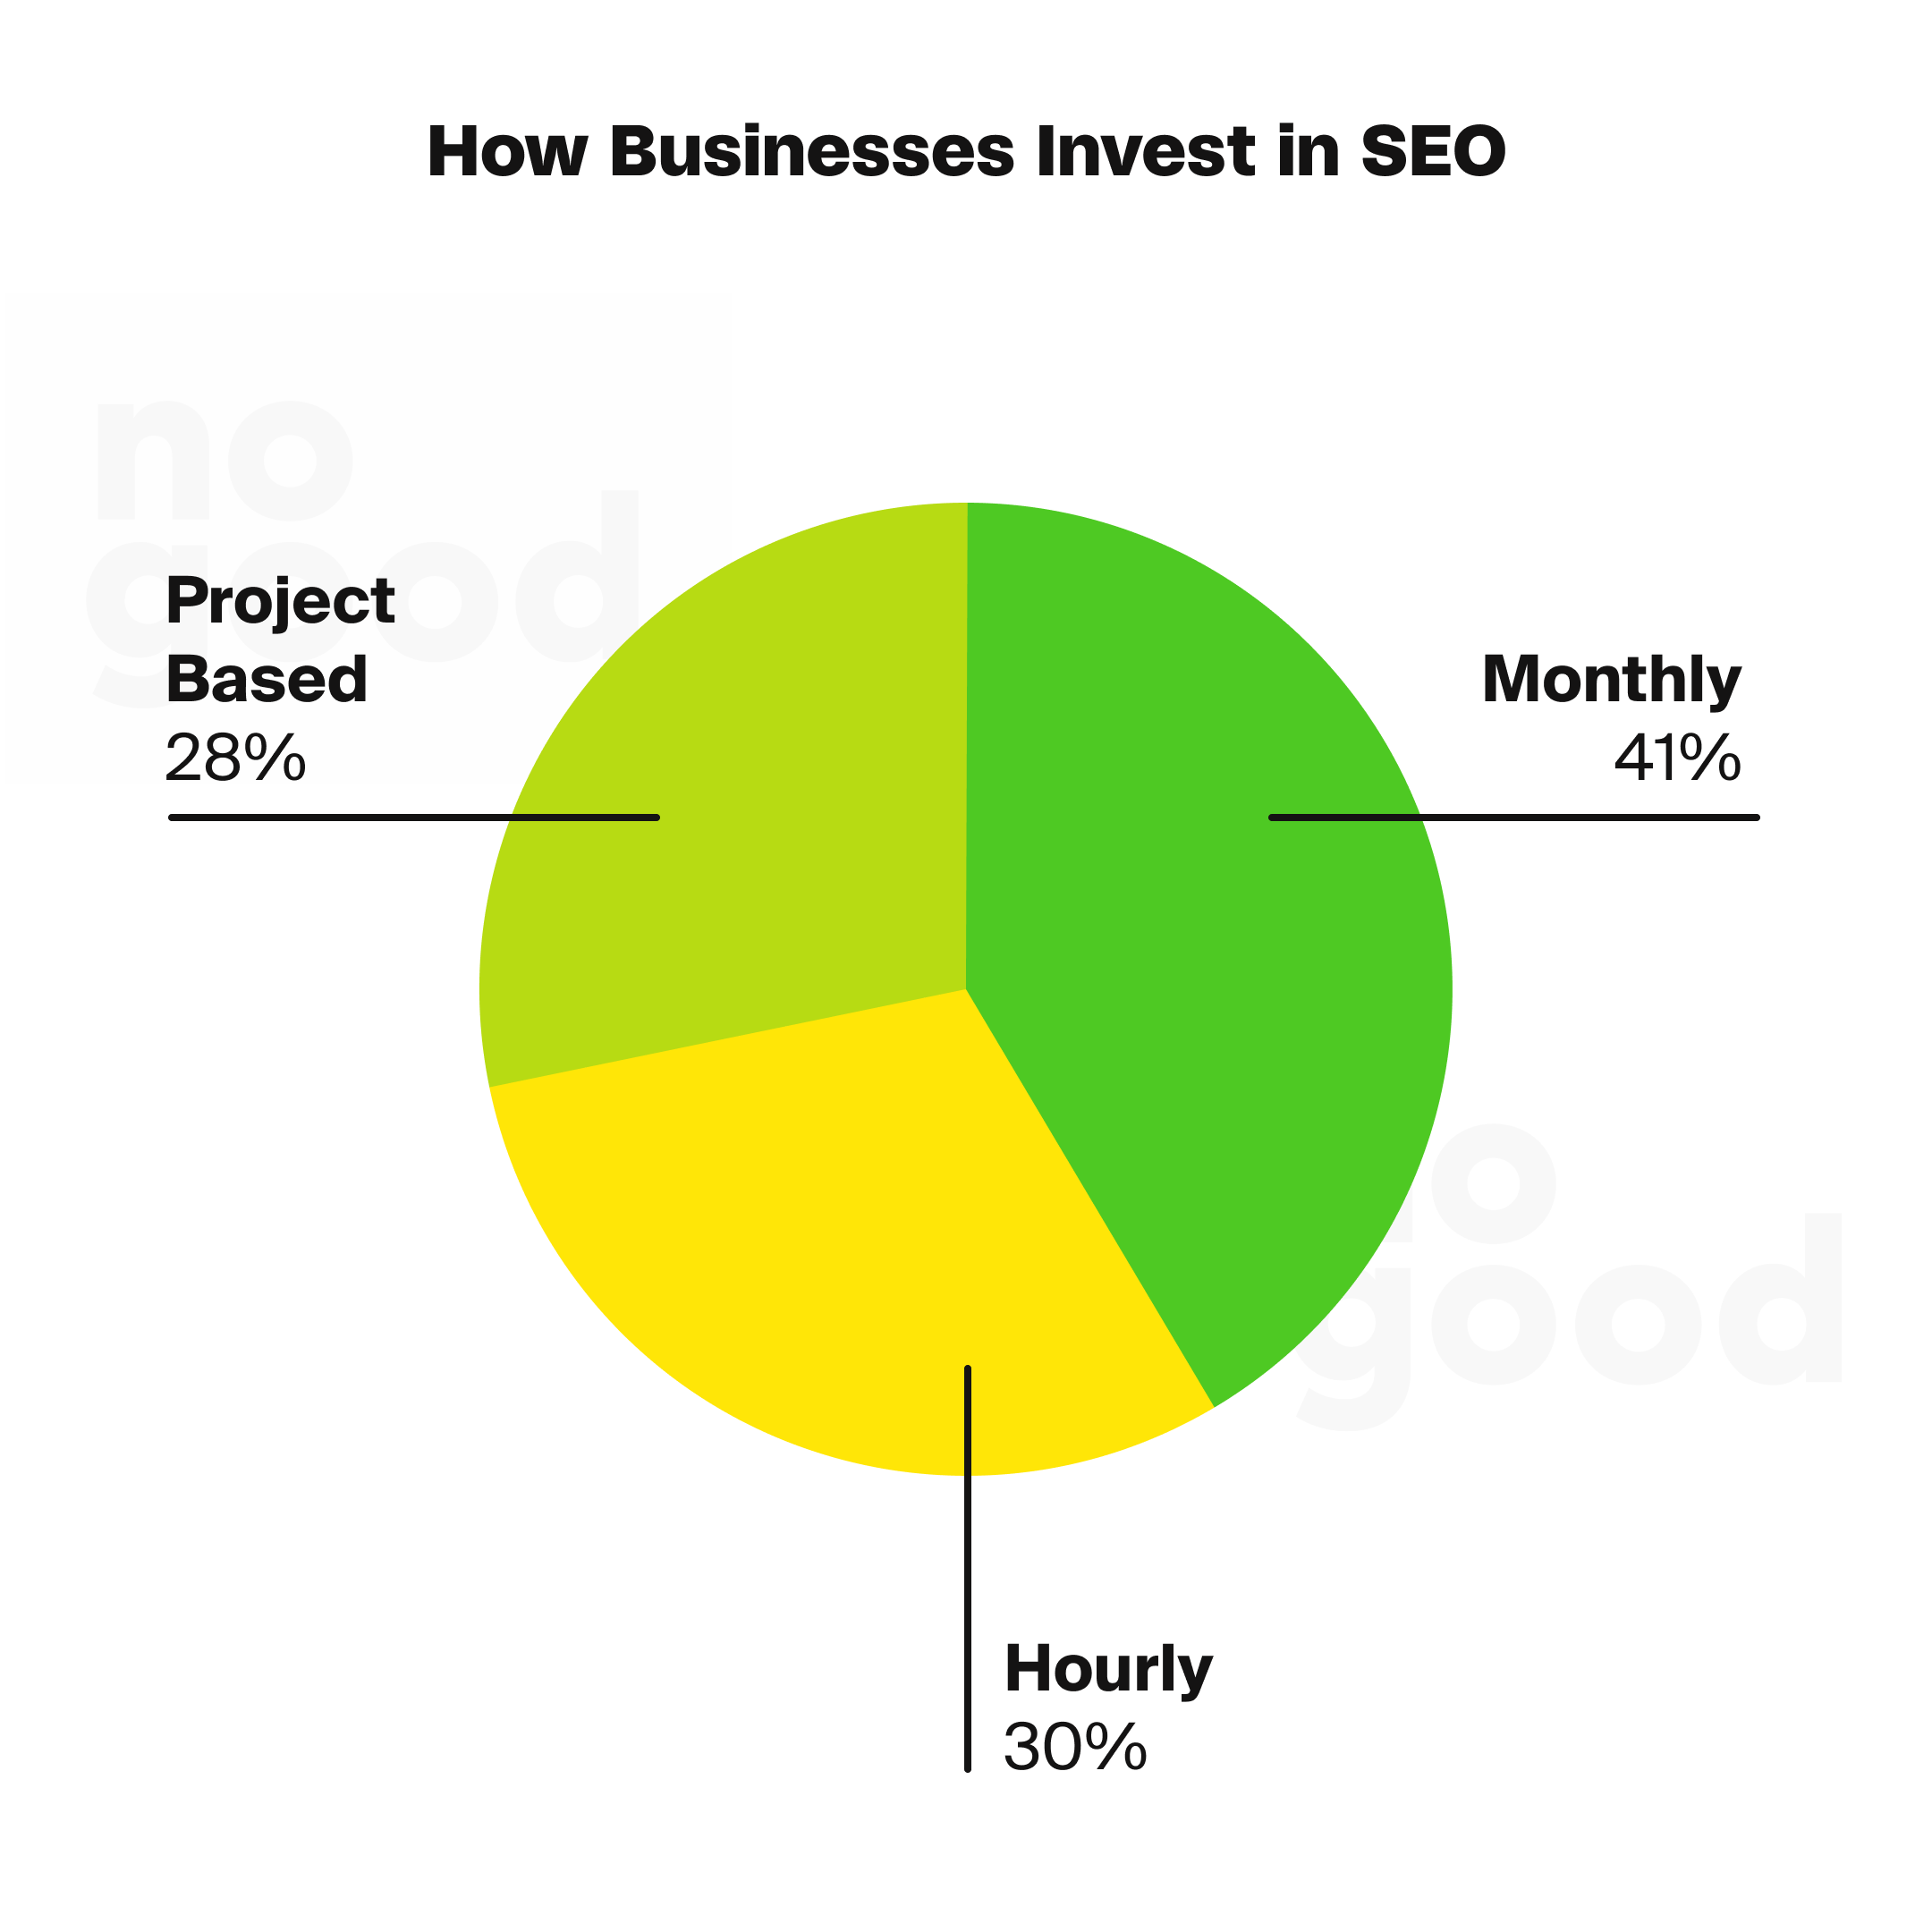 How businesses invest in SEO